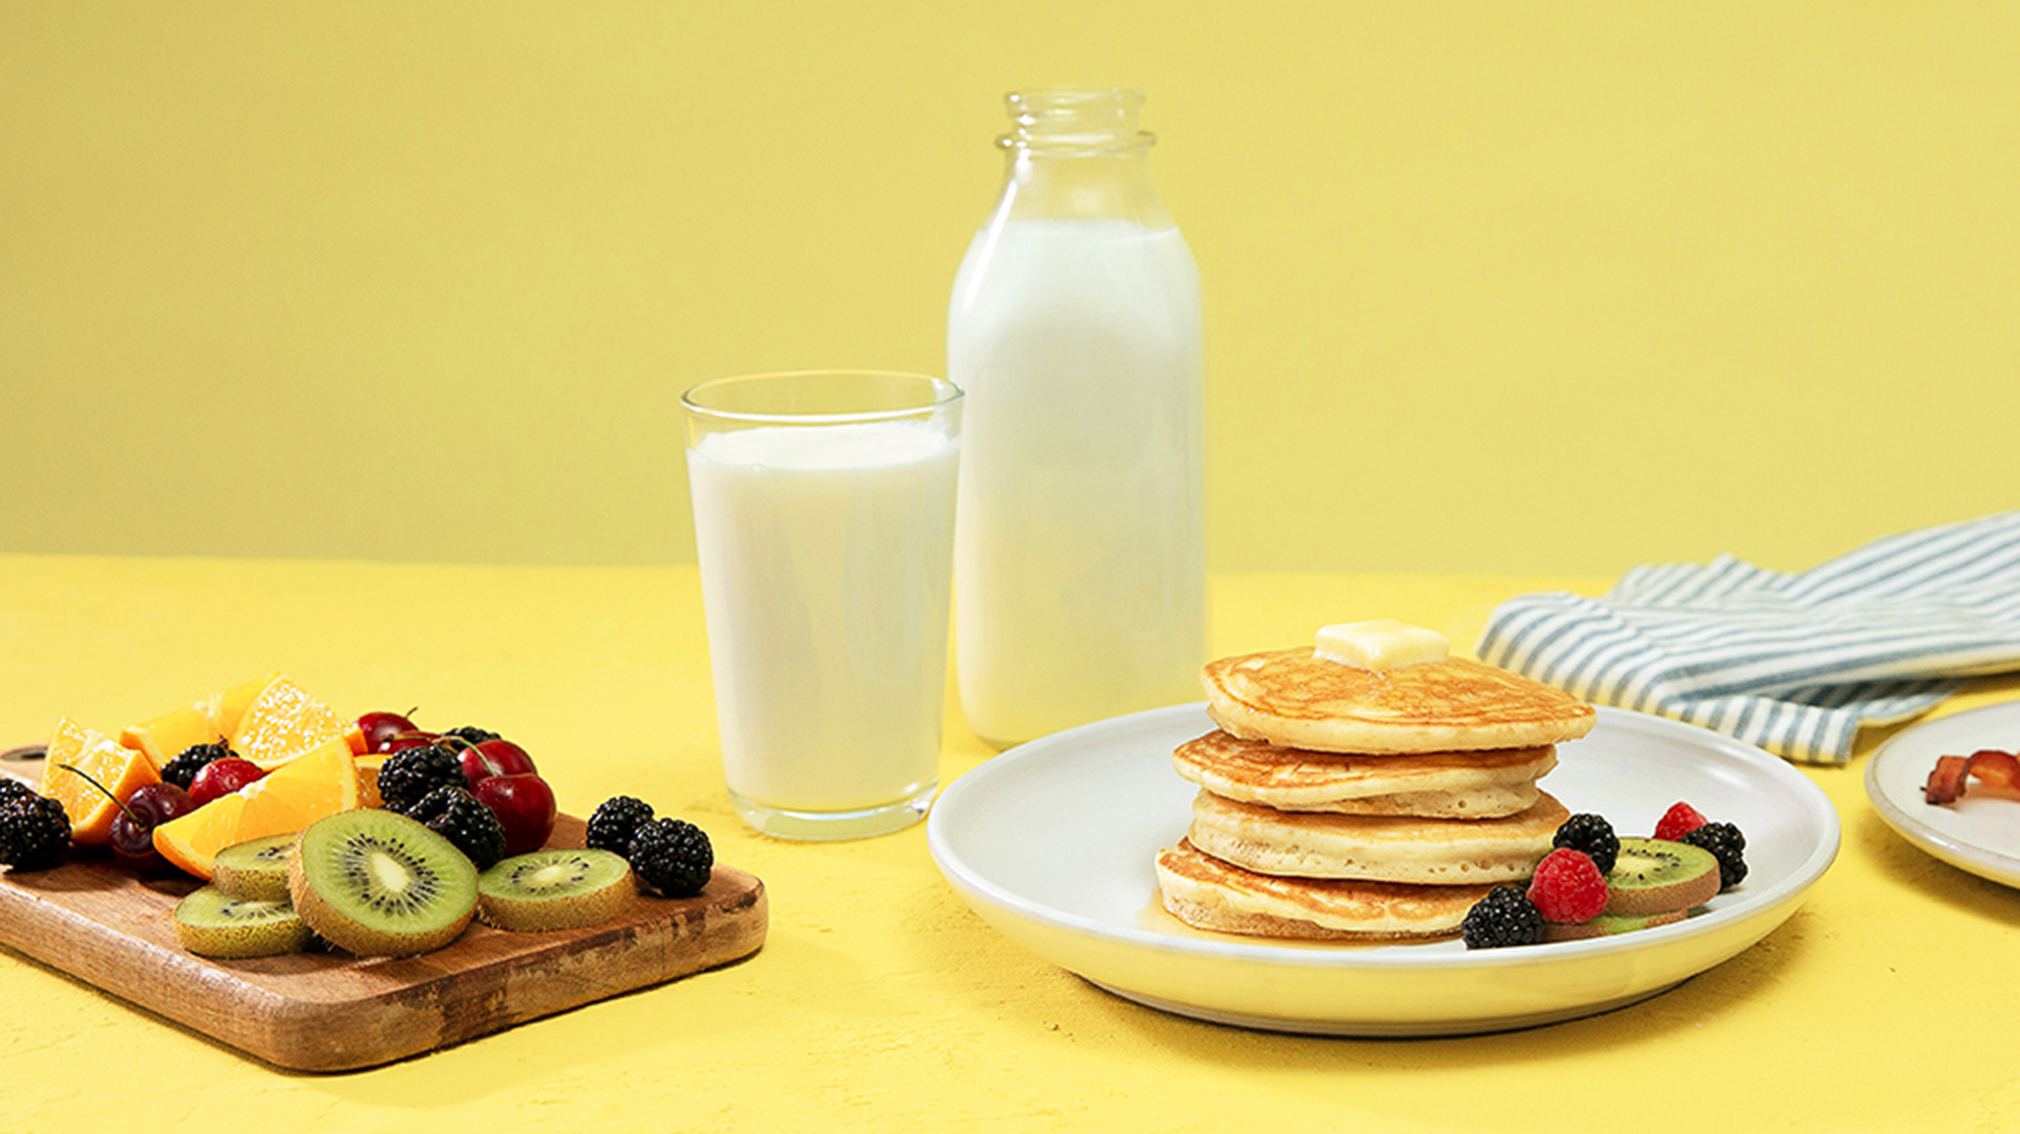 Stack of pancakes with a big glass of milk and a plate of fruit.